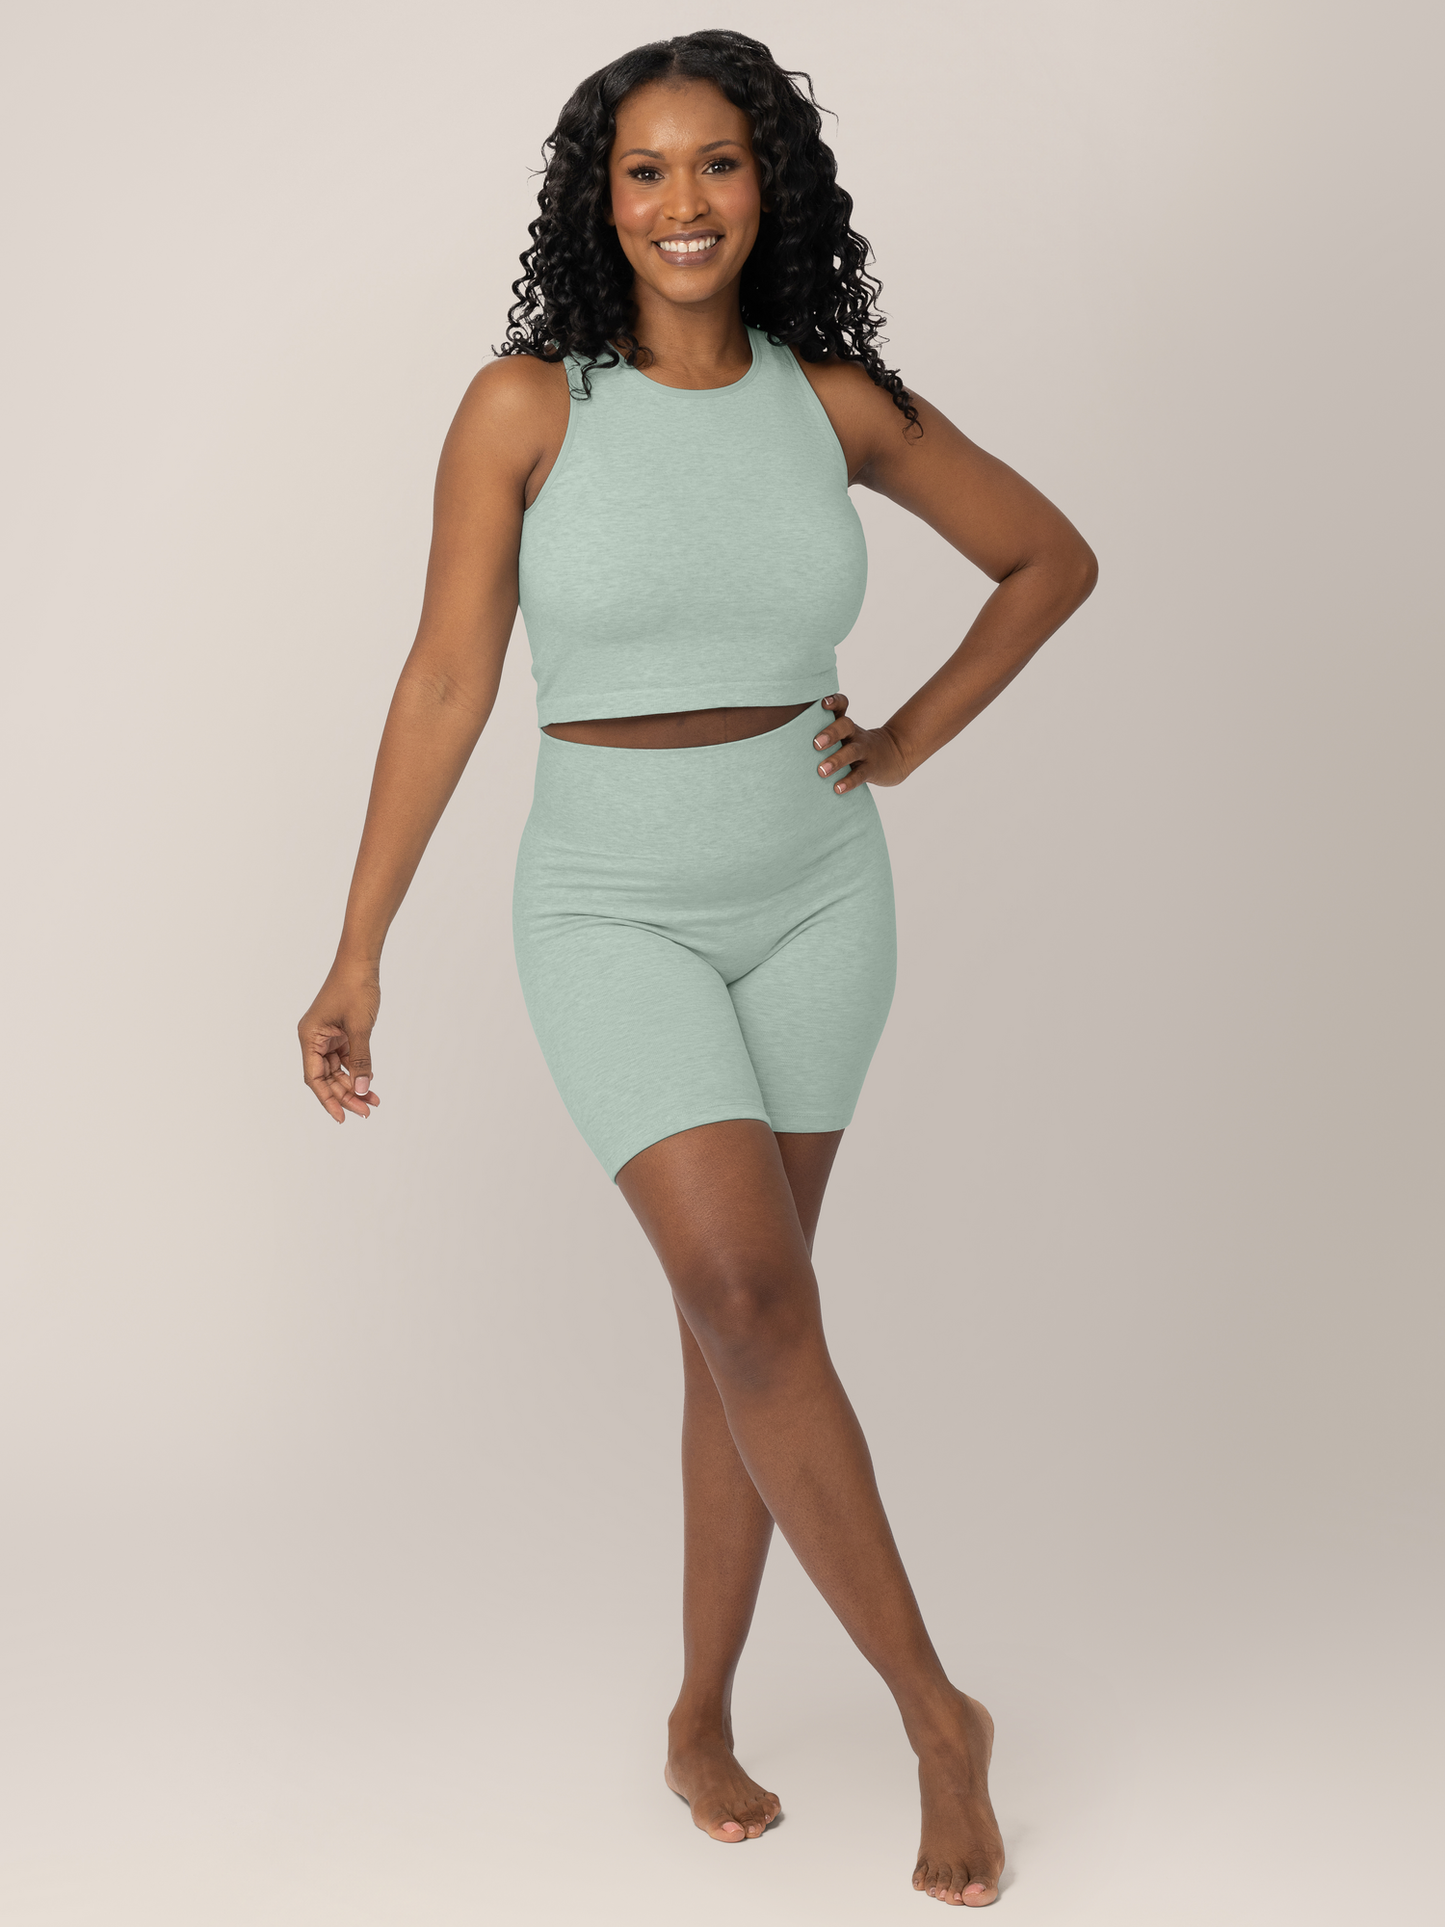 Full body front view of model holding baby and wearing the Sublime® Bamboo Maternity & Postpartum Bike Short in Dusty Blue Green Heather, paired with the matching Sublime® Bamboo Maternity & Nursing Longline Bra.